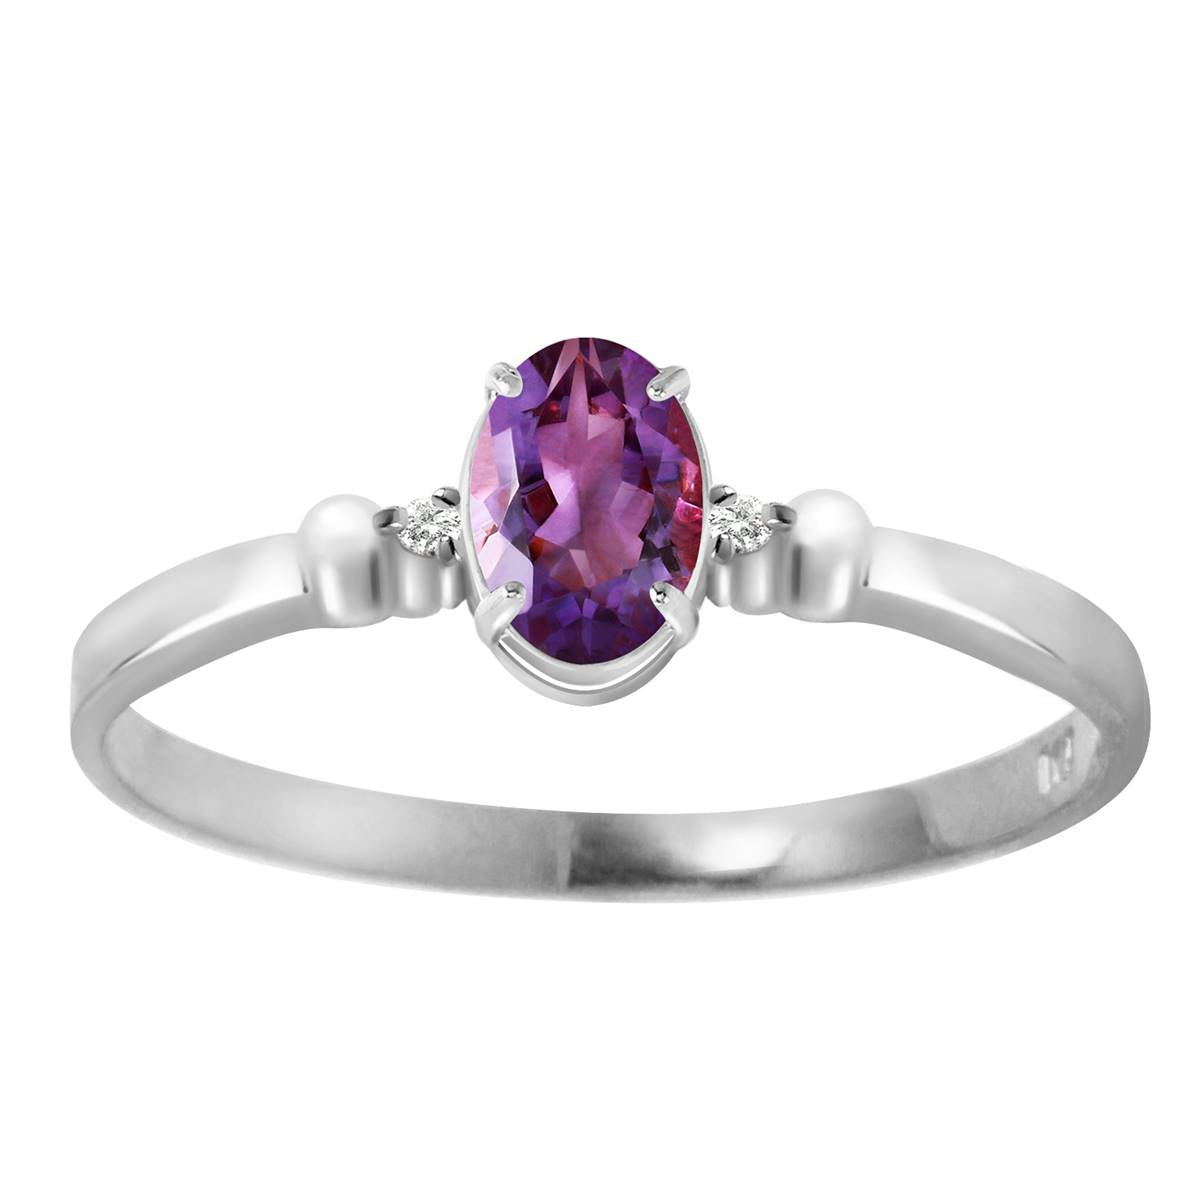 0.46 Carat 14K Solid White Gold That Avails Much Amethyst Diamond Ring